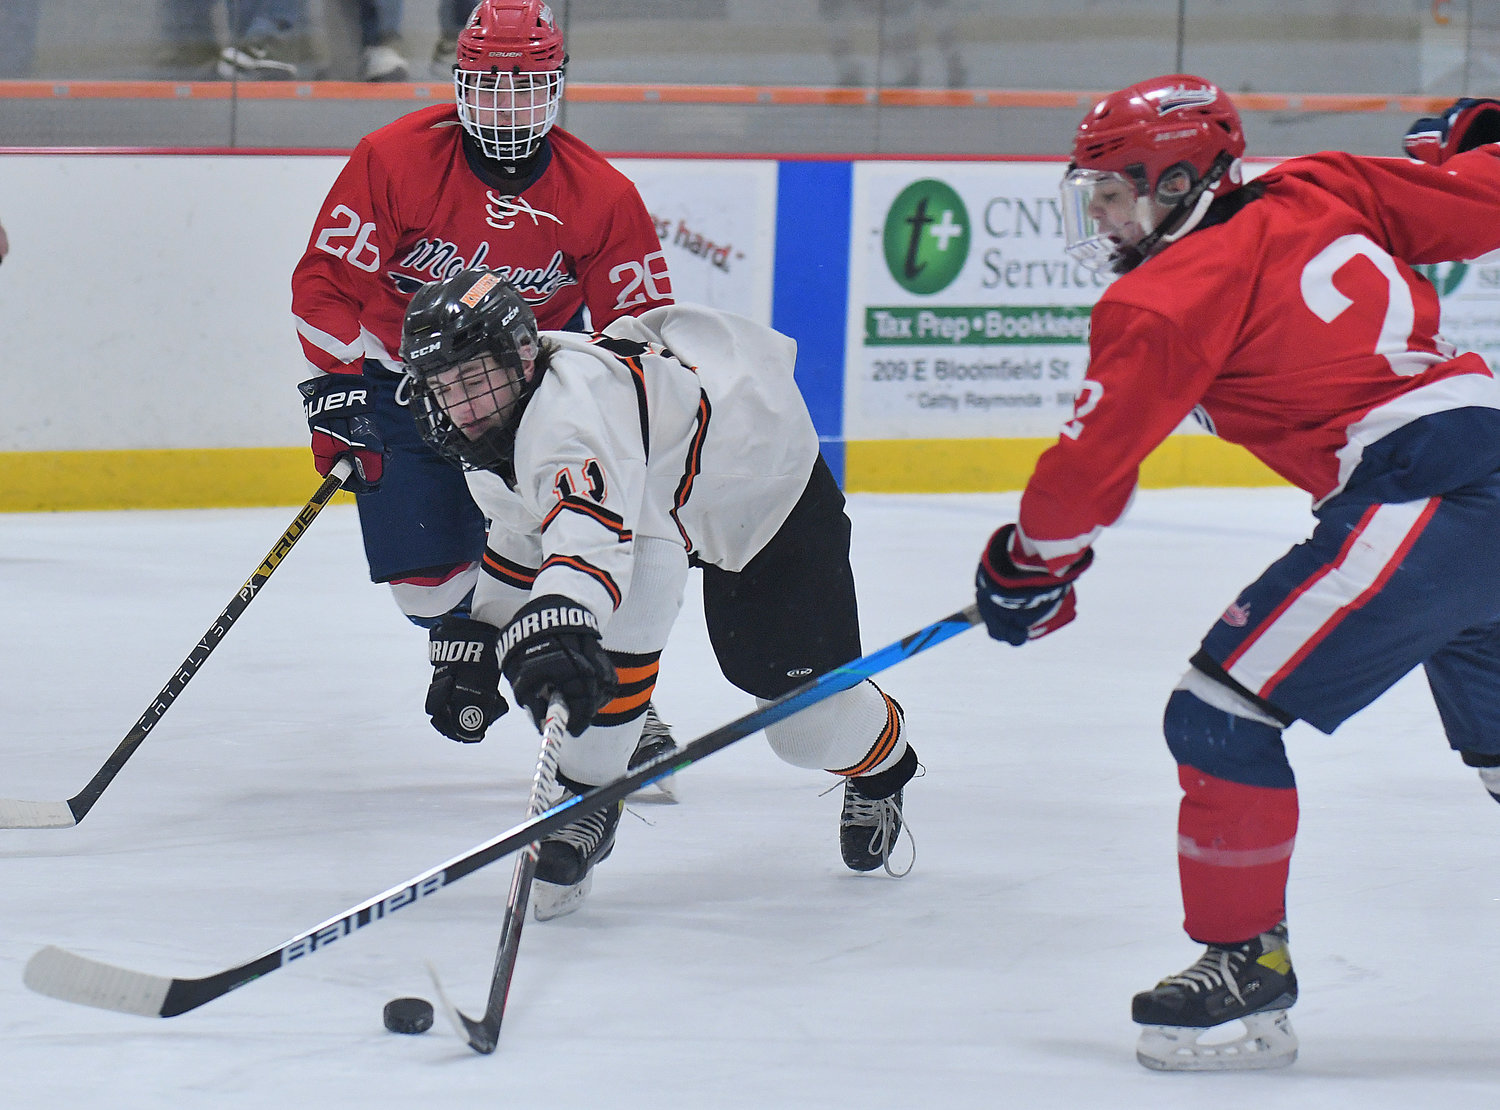 Rome Free Academy forward John Sharrino controls the puck while weaving through the defense of Niskayuna’s Dominic Calareso, left, and Luca Coppola  in the first period Friday afternoon at home in Kennedy Arena. Sharrino had three goals and two assists in the Black Knights’ 10-0 win.